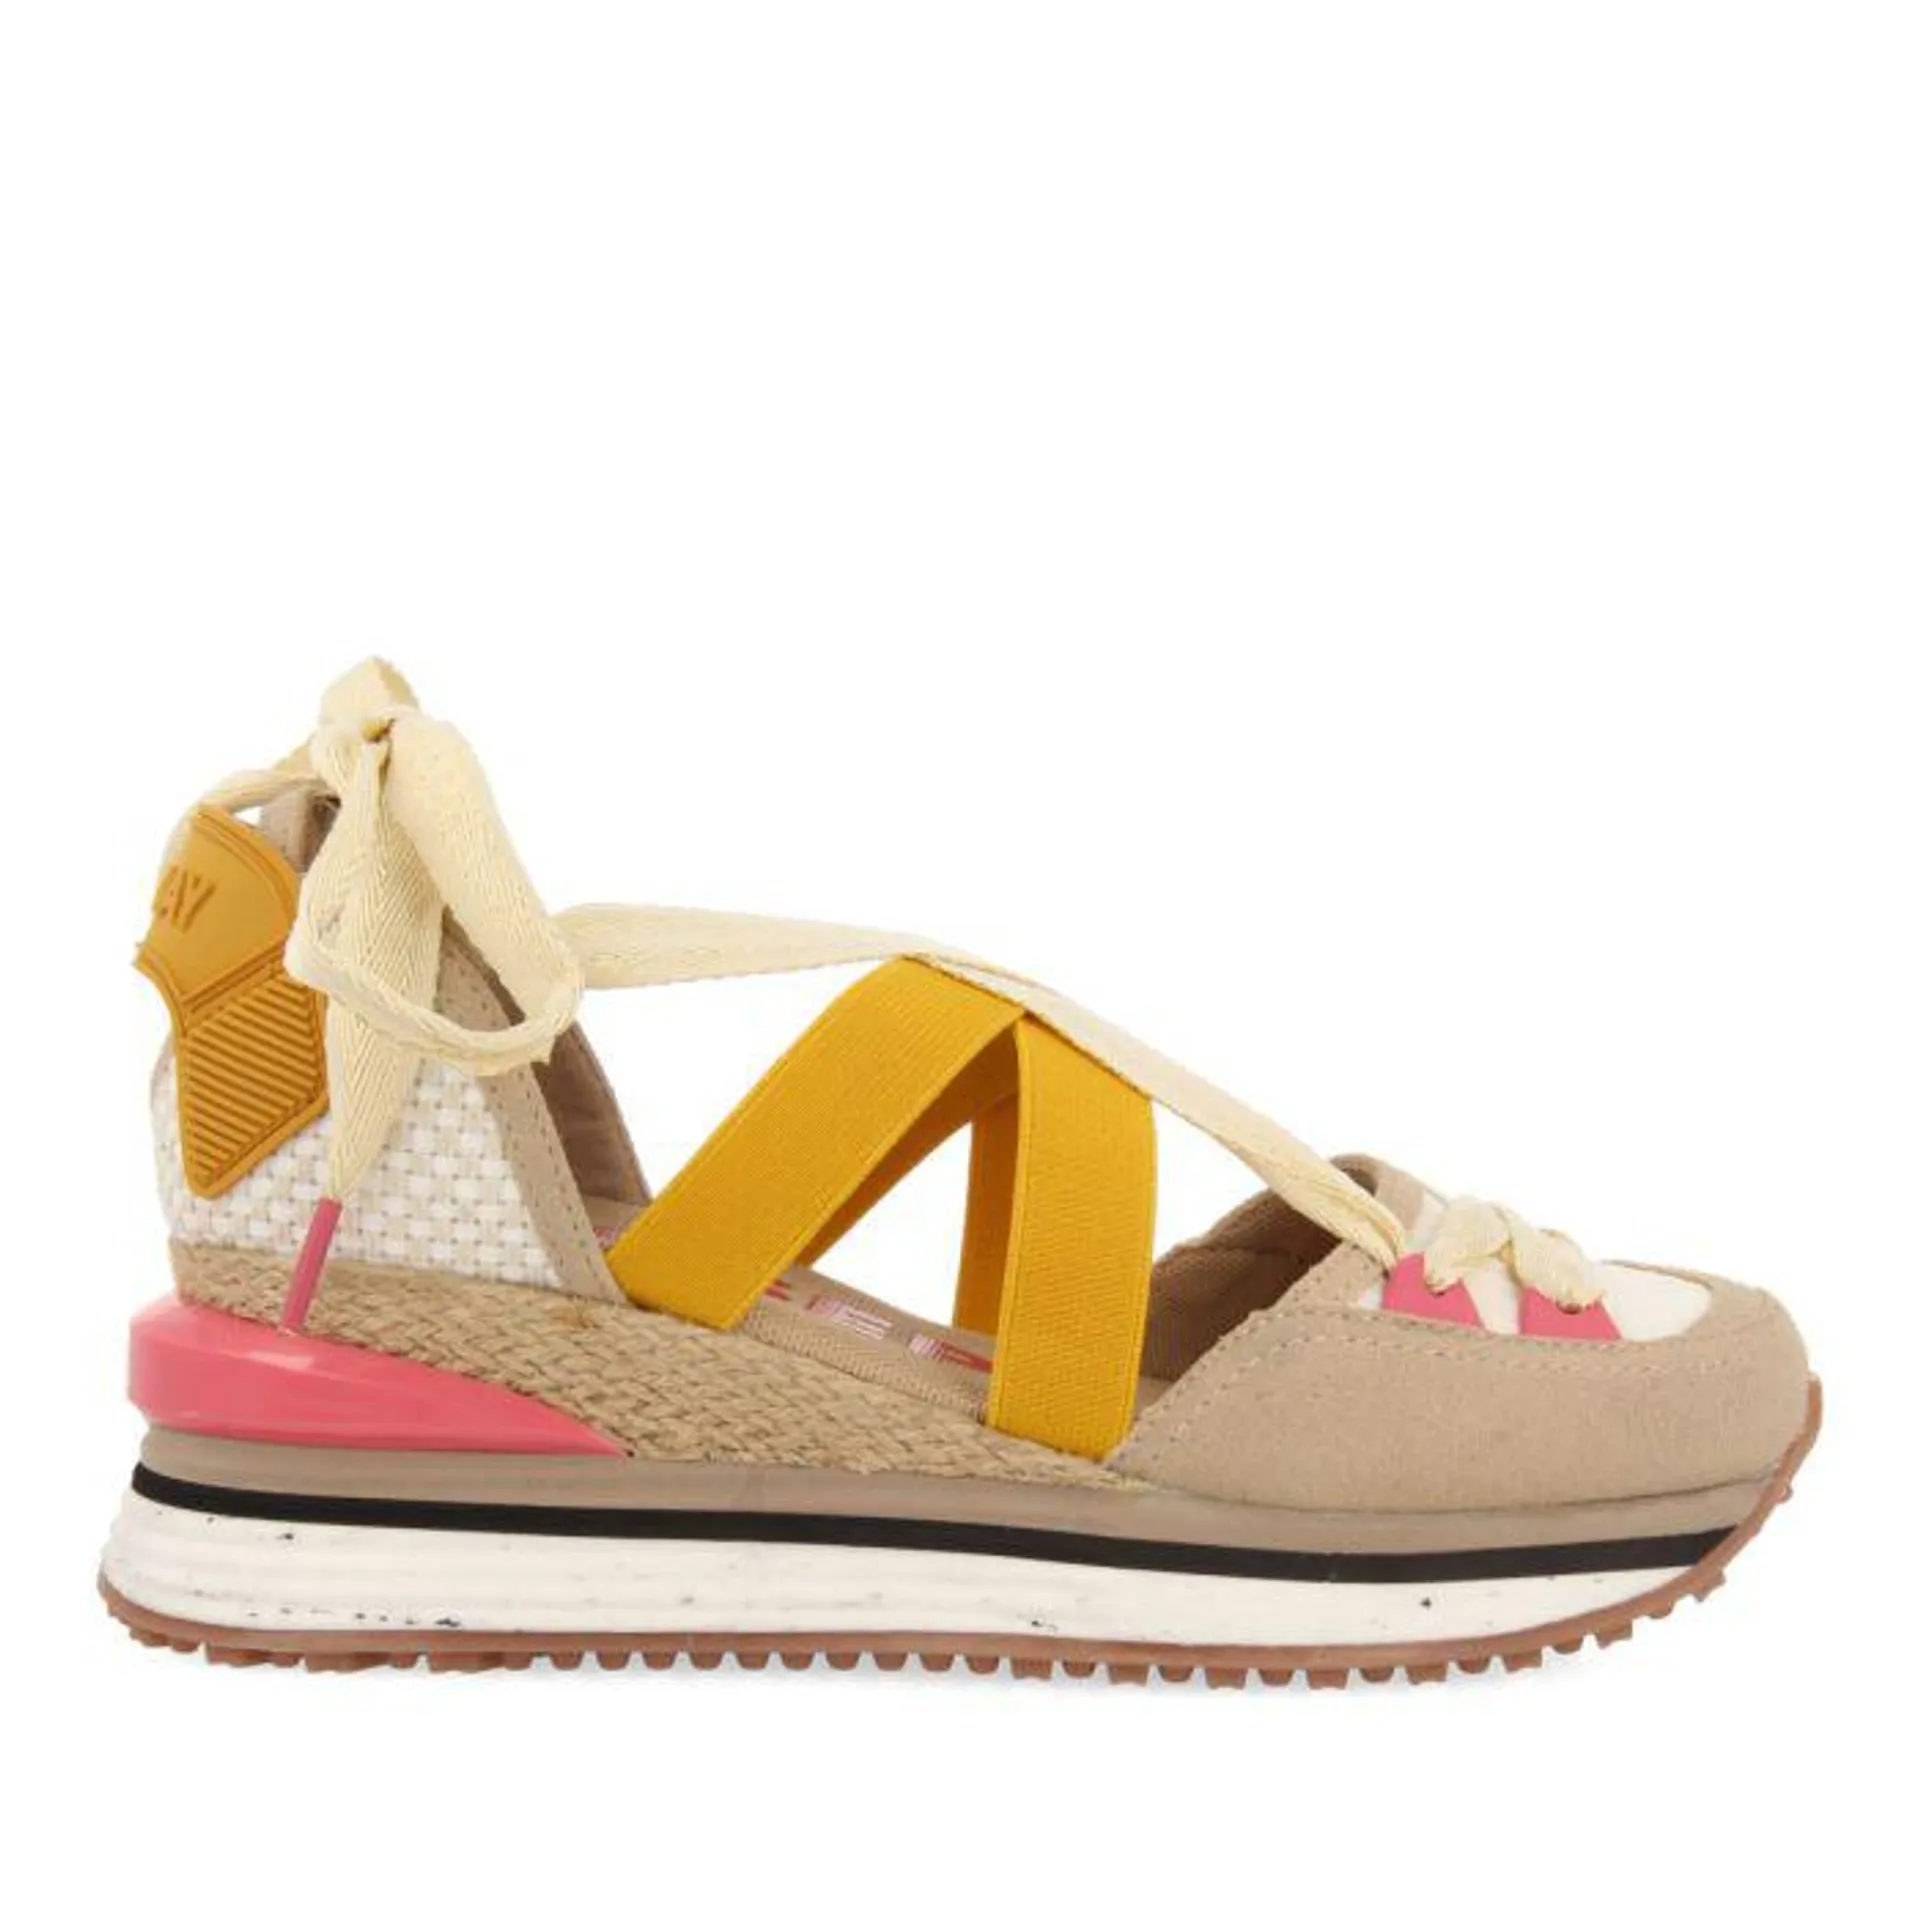 Coinches beige espadrille sneakers with wedges